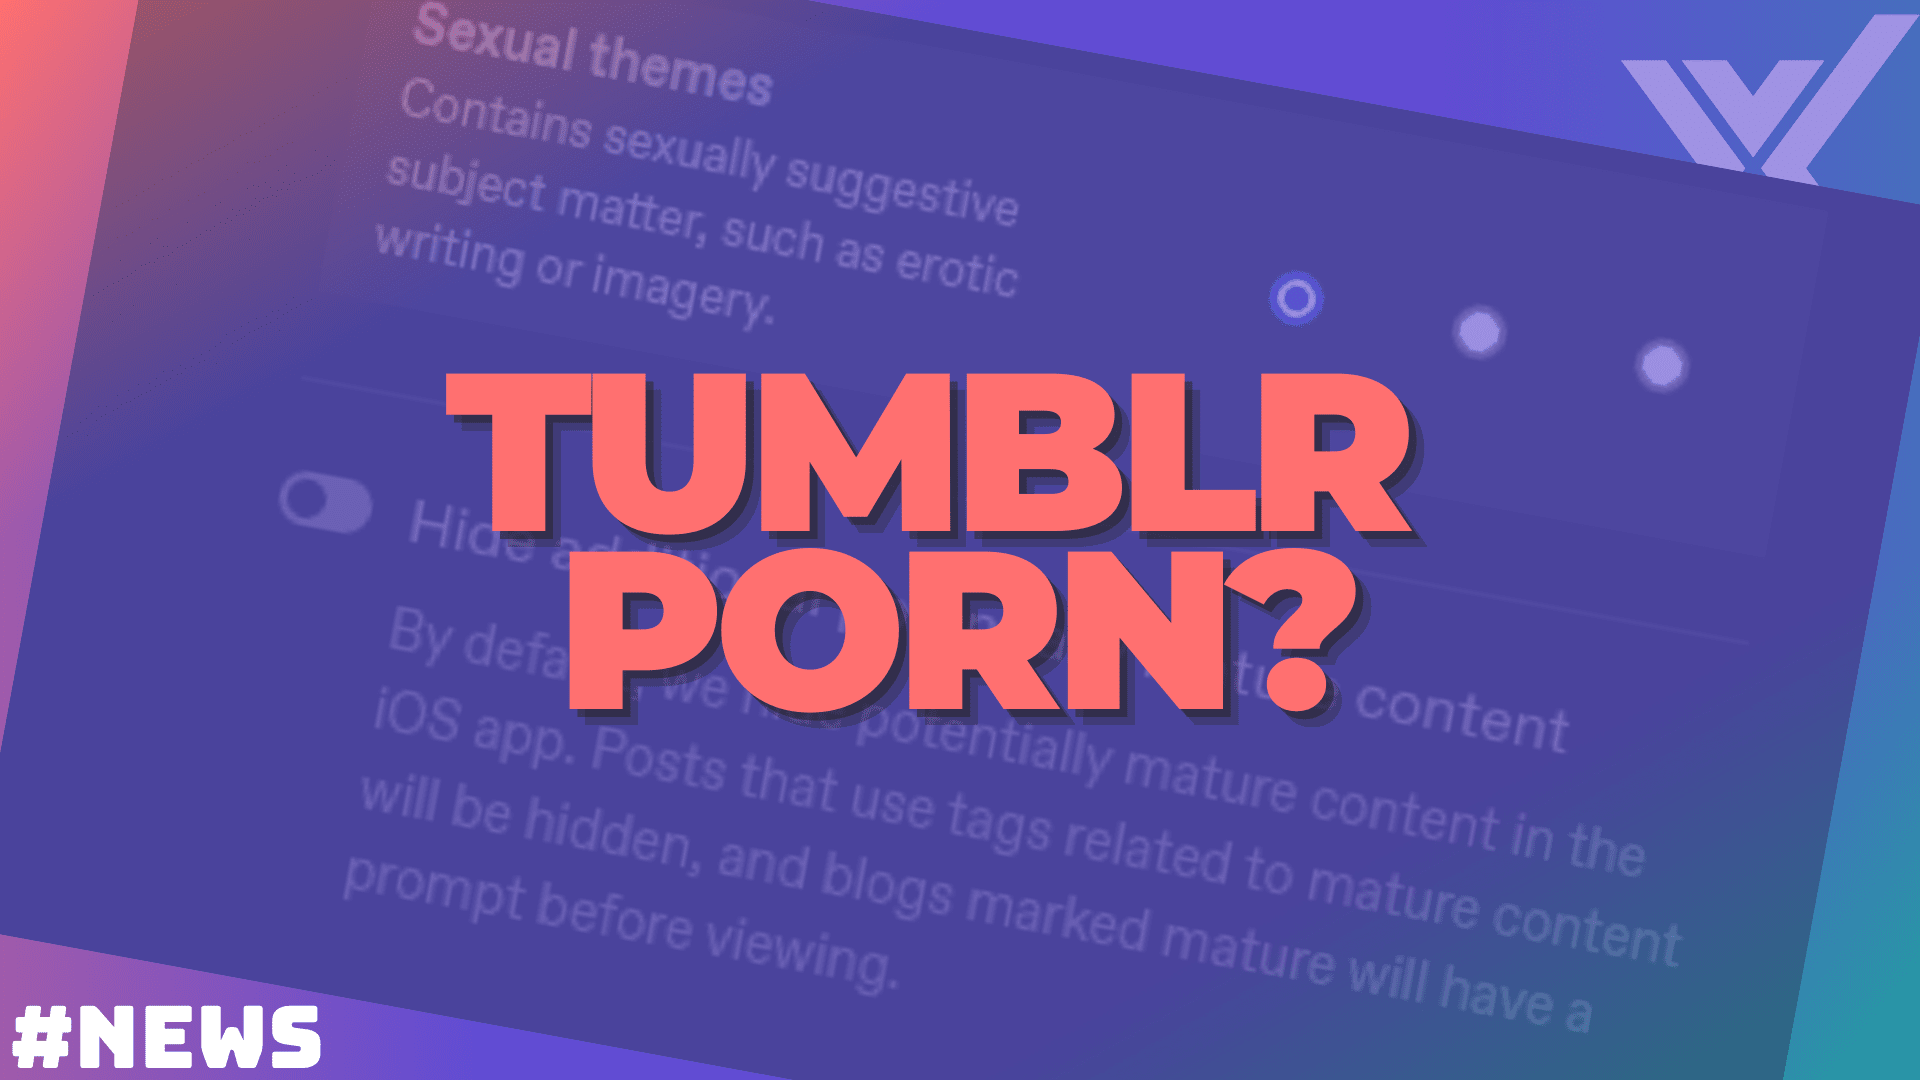 Tumblr’s introduced a ‘sexual themes’ label… but will porn be welcomed back?